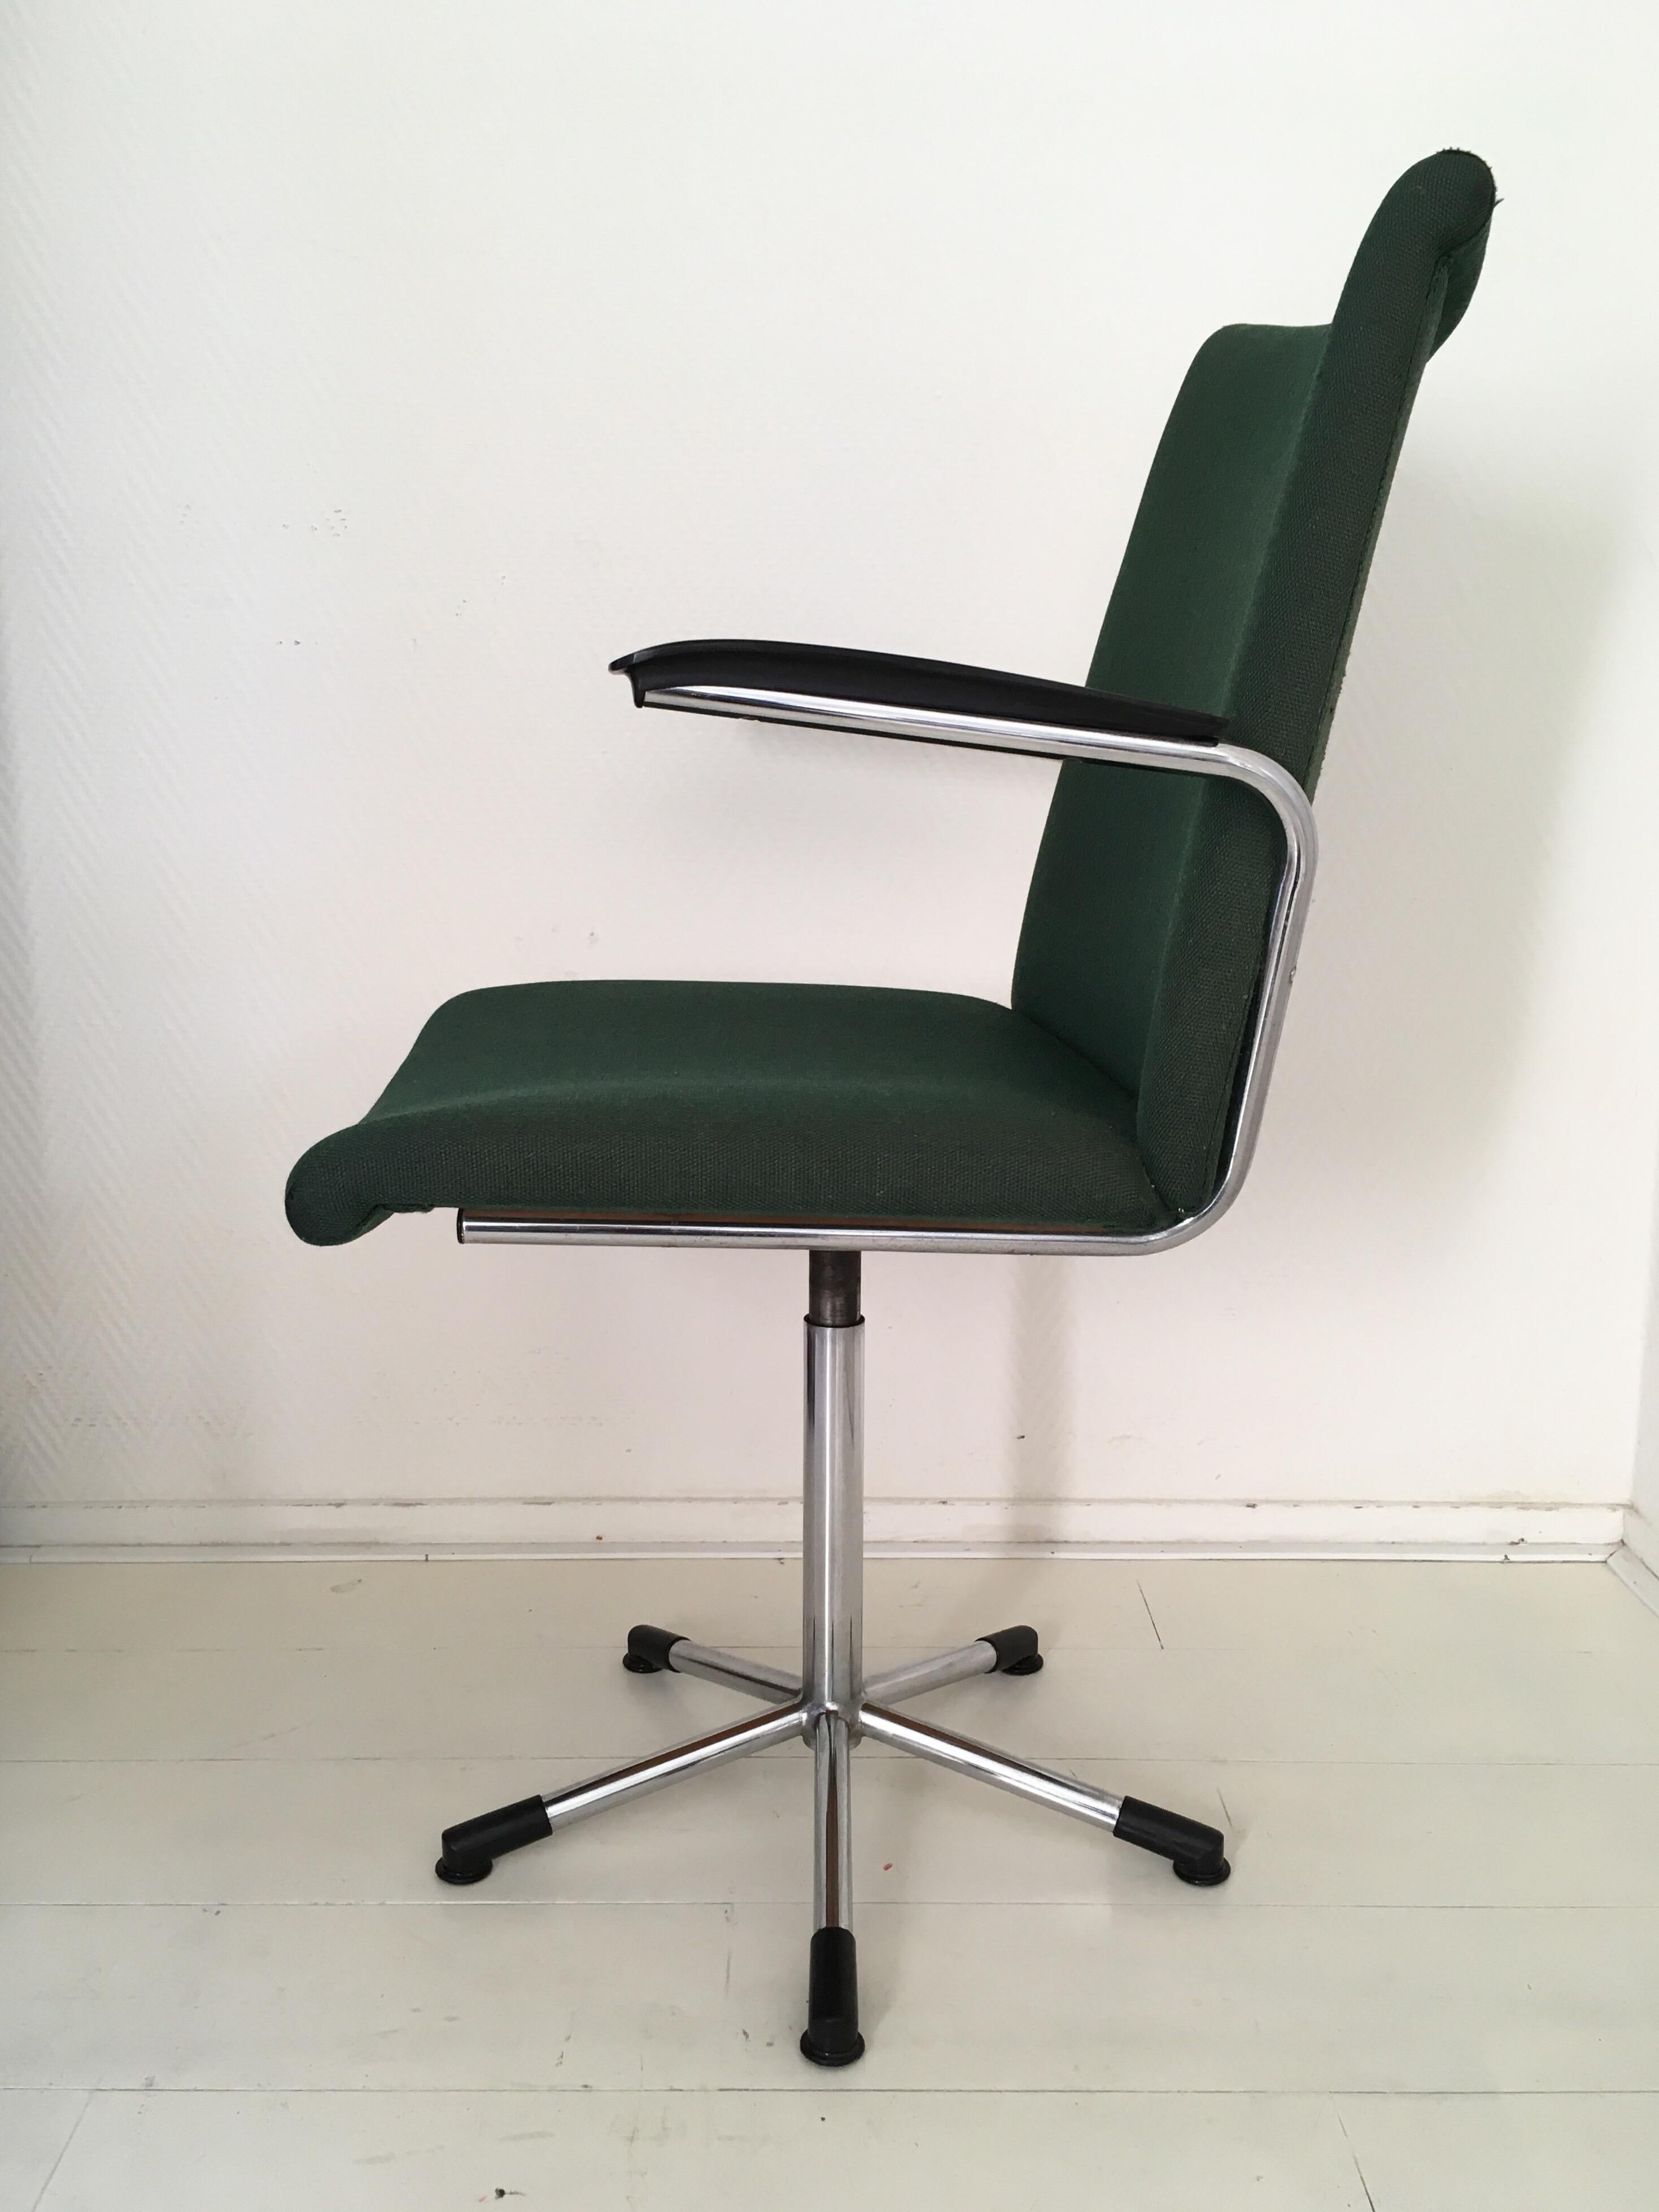 This Minimalist desk chair (Model 3314) with moss green upholstery, features a chromed base with a star foot and Bakelite armrests. The chair remains in very good condition and shows minimal signs of age and use. Seat height is adjustable from 43-56